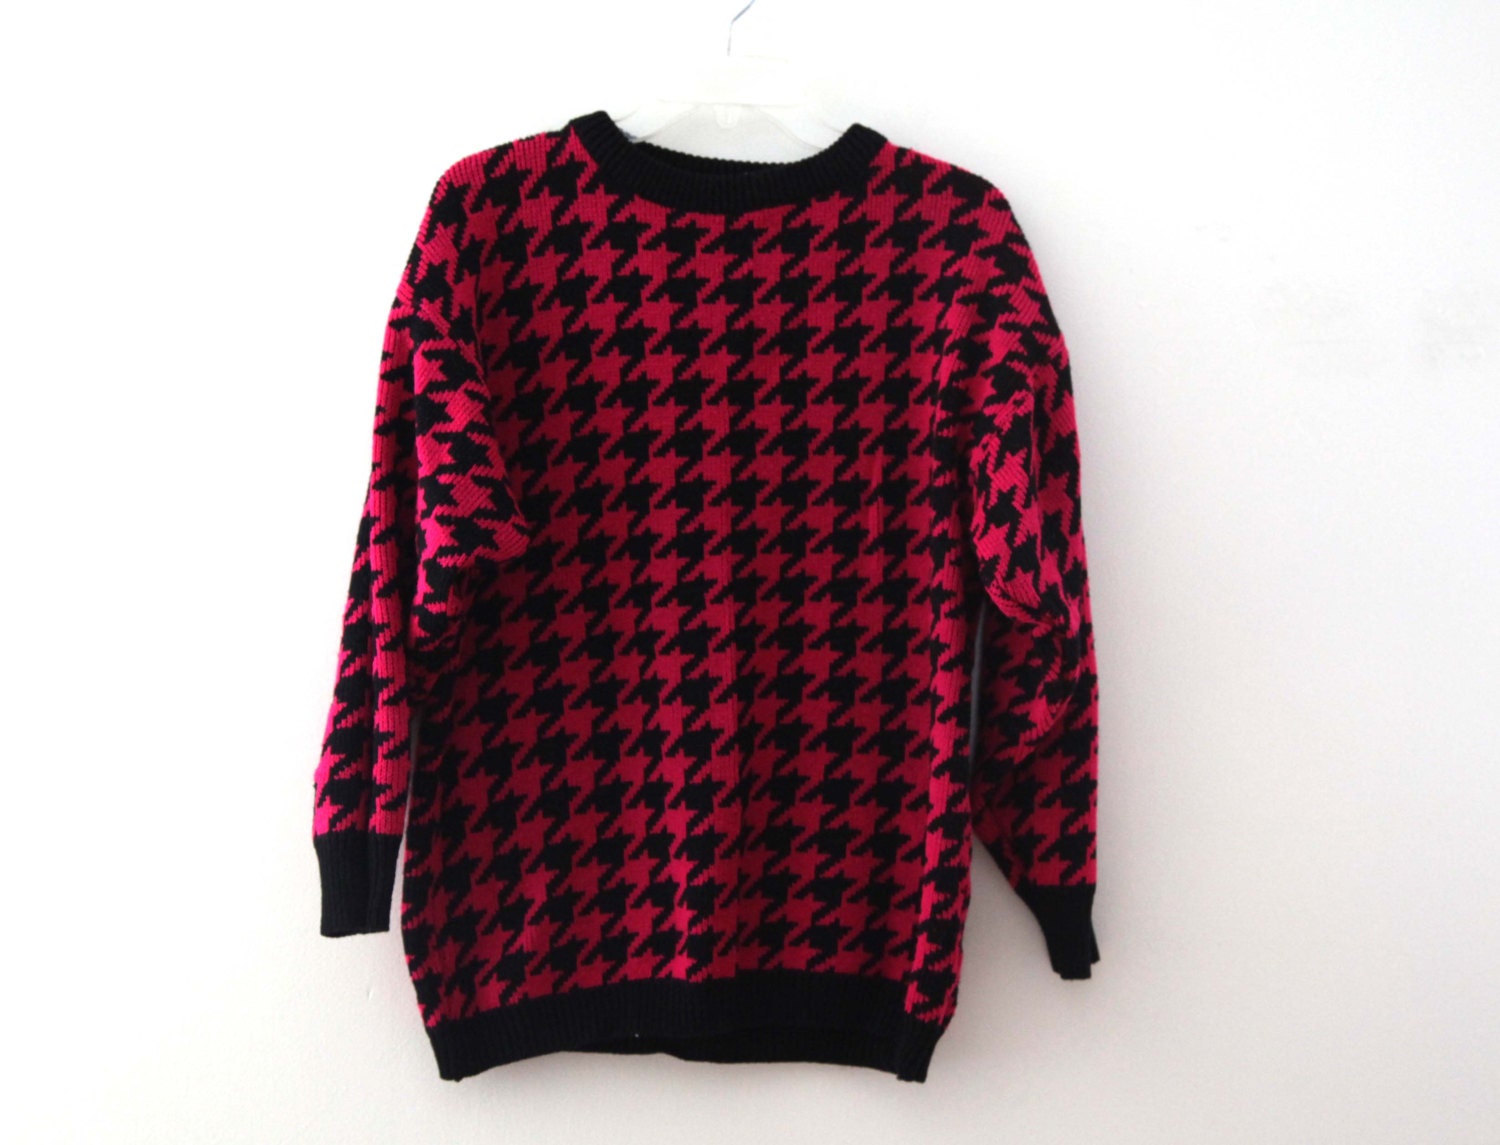 Vintage 80s Sweater houndstooth hot pink and black